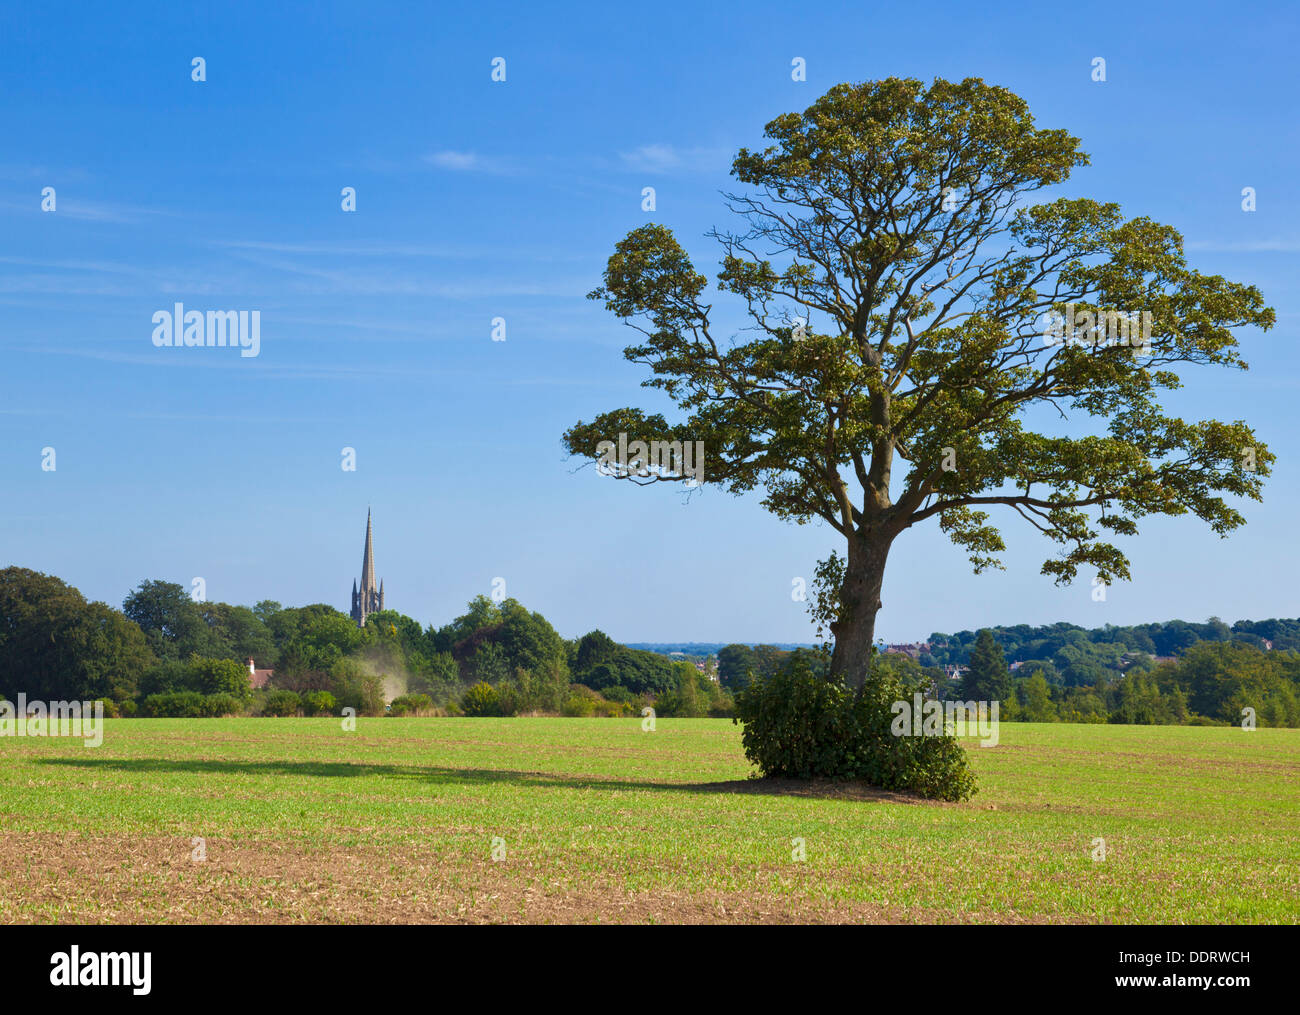 View of Louth church spire in the distance Lincolnshire wolds England UK GB EU Europe Stock Photo